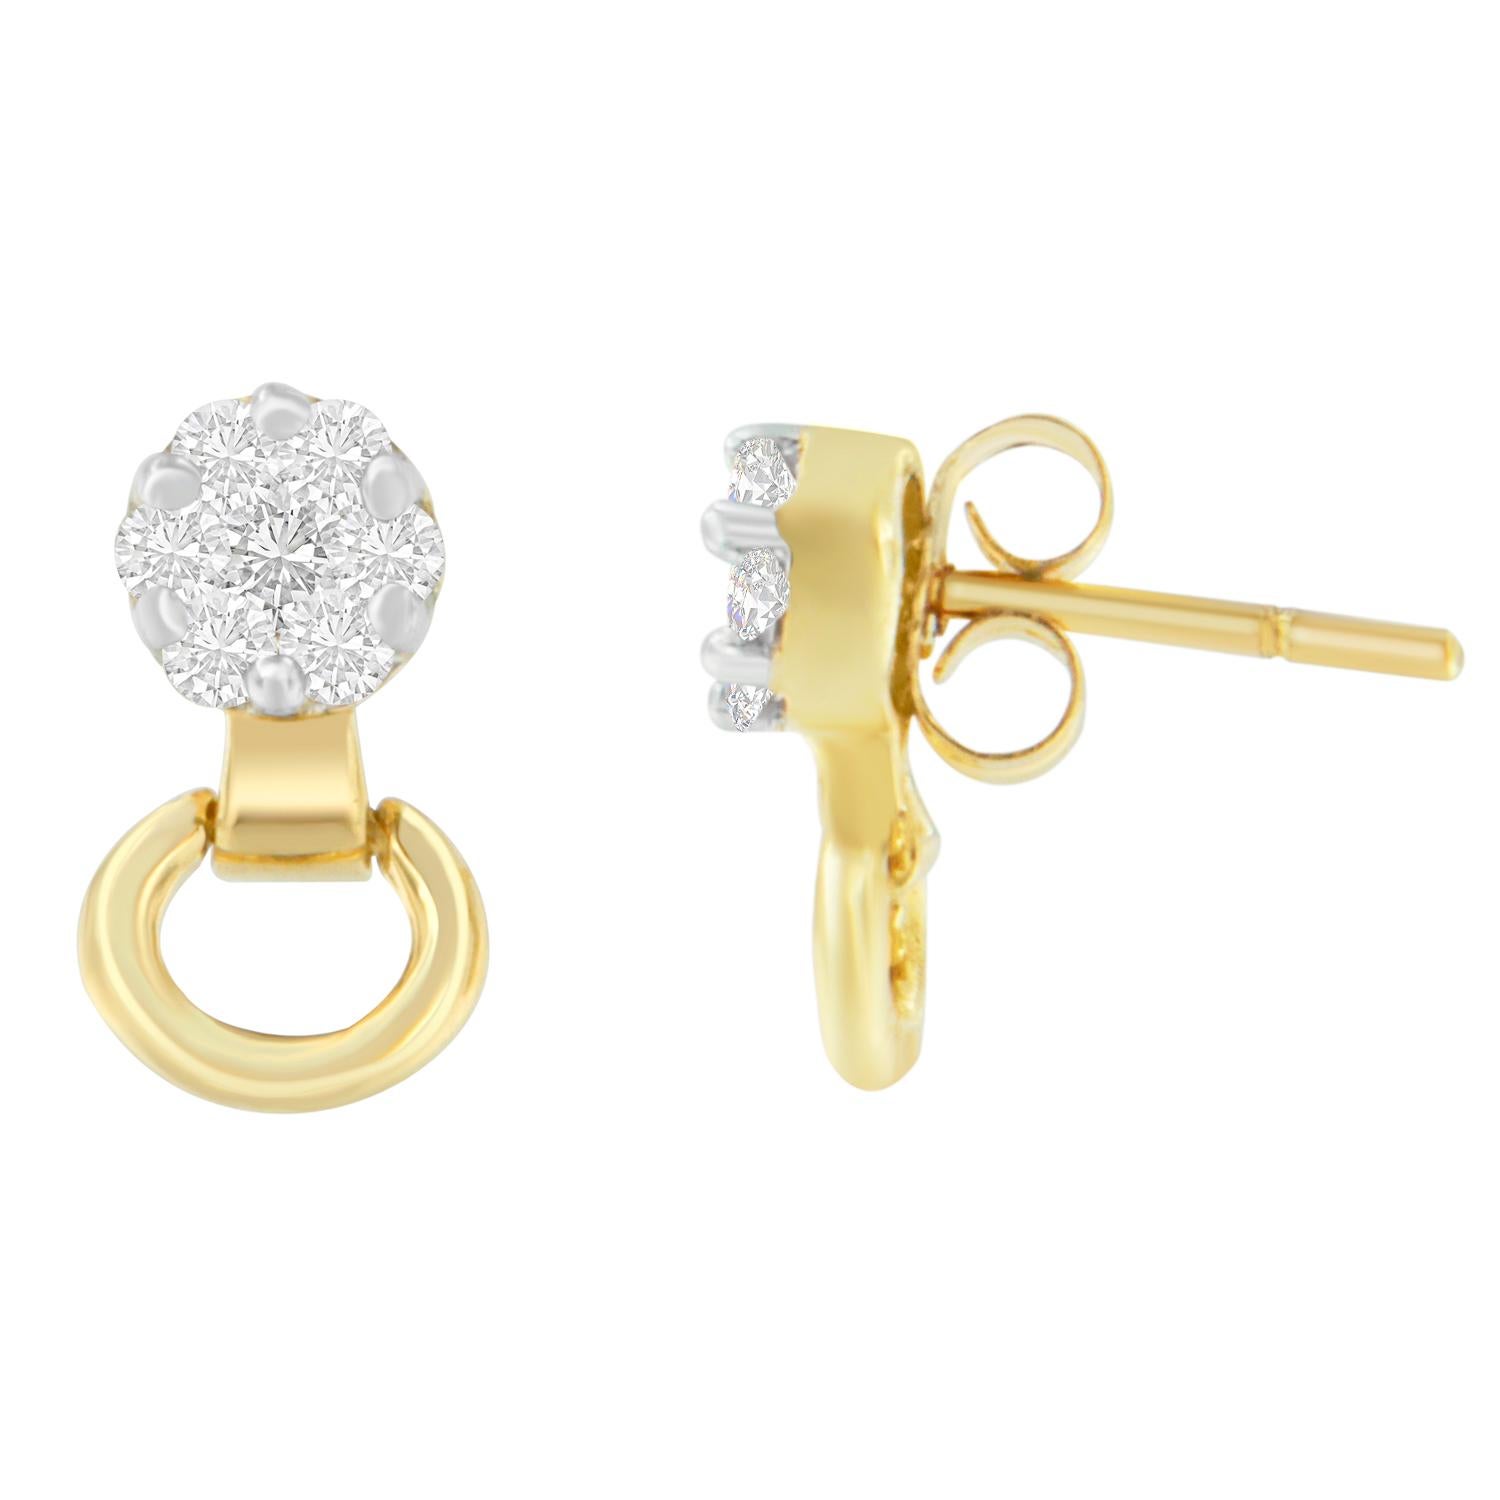 Contemporary 14K Yellow Gold 1/2 Carat Diamond Stud Earrings For Sale